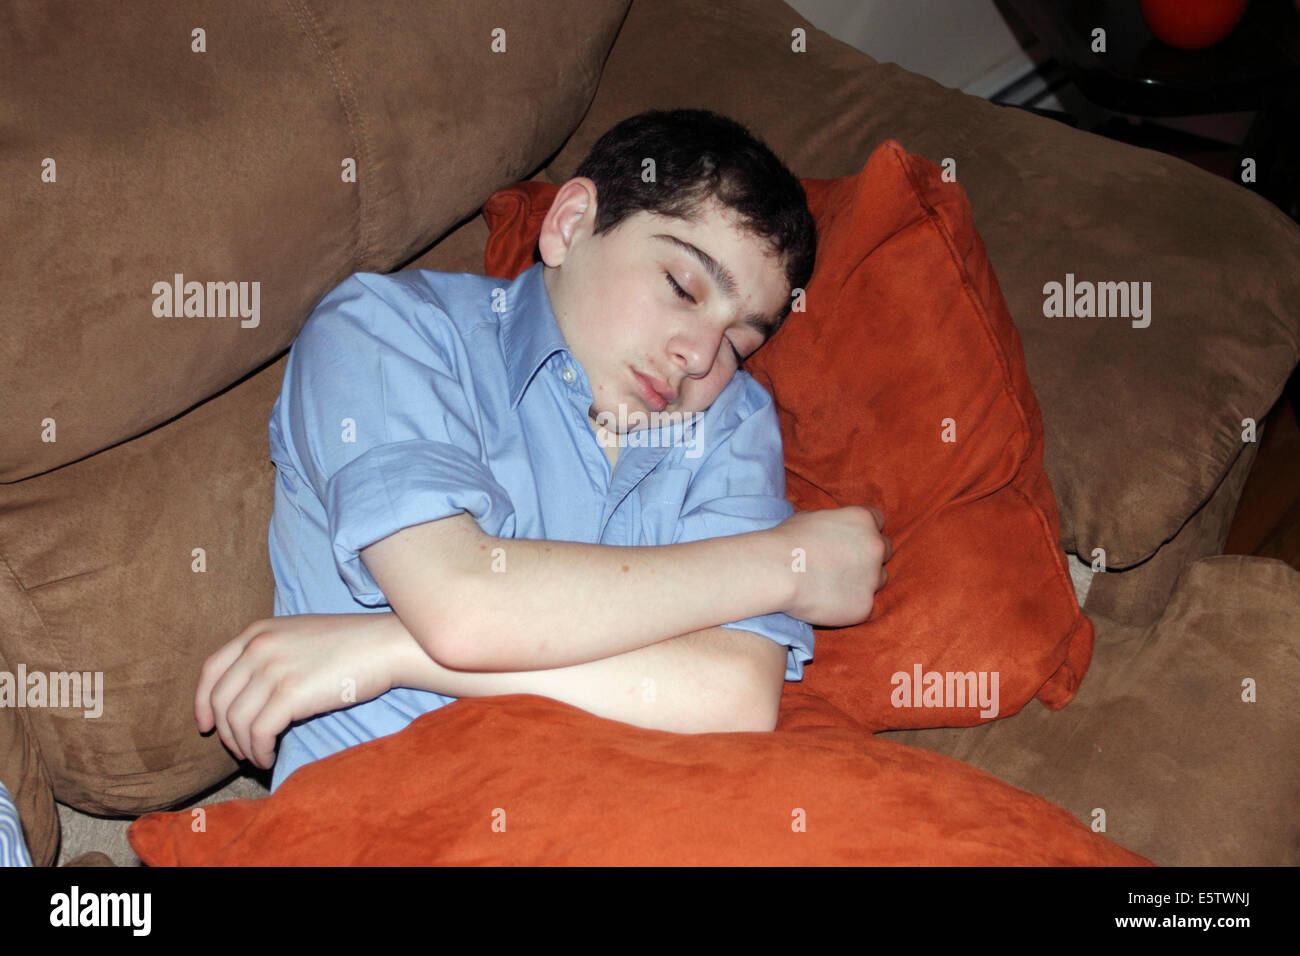 12 year old boy napping Stock Photo